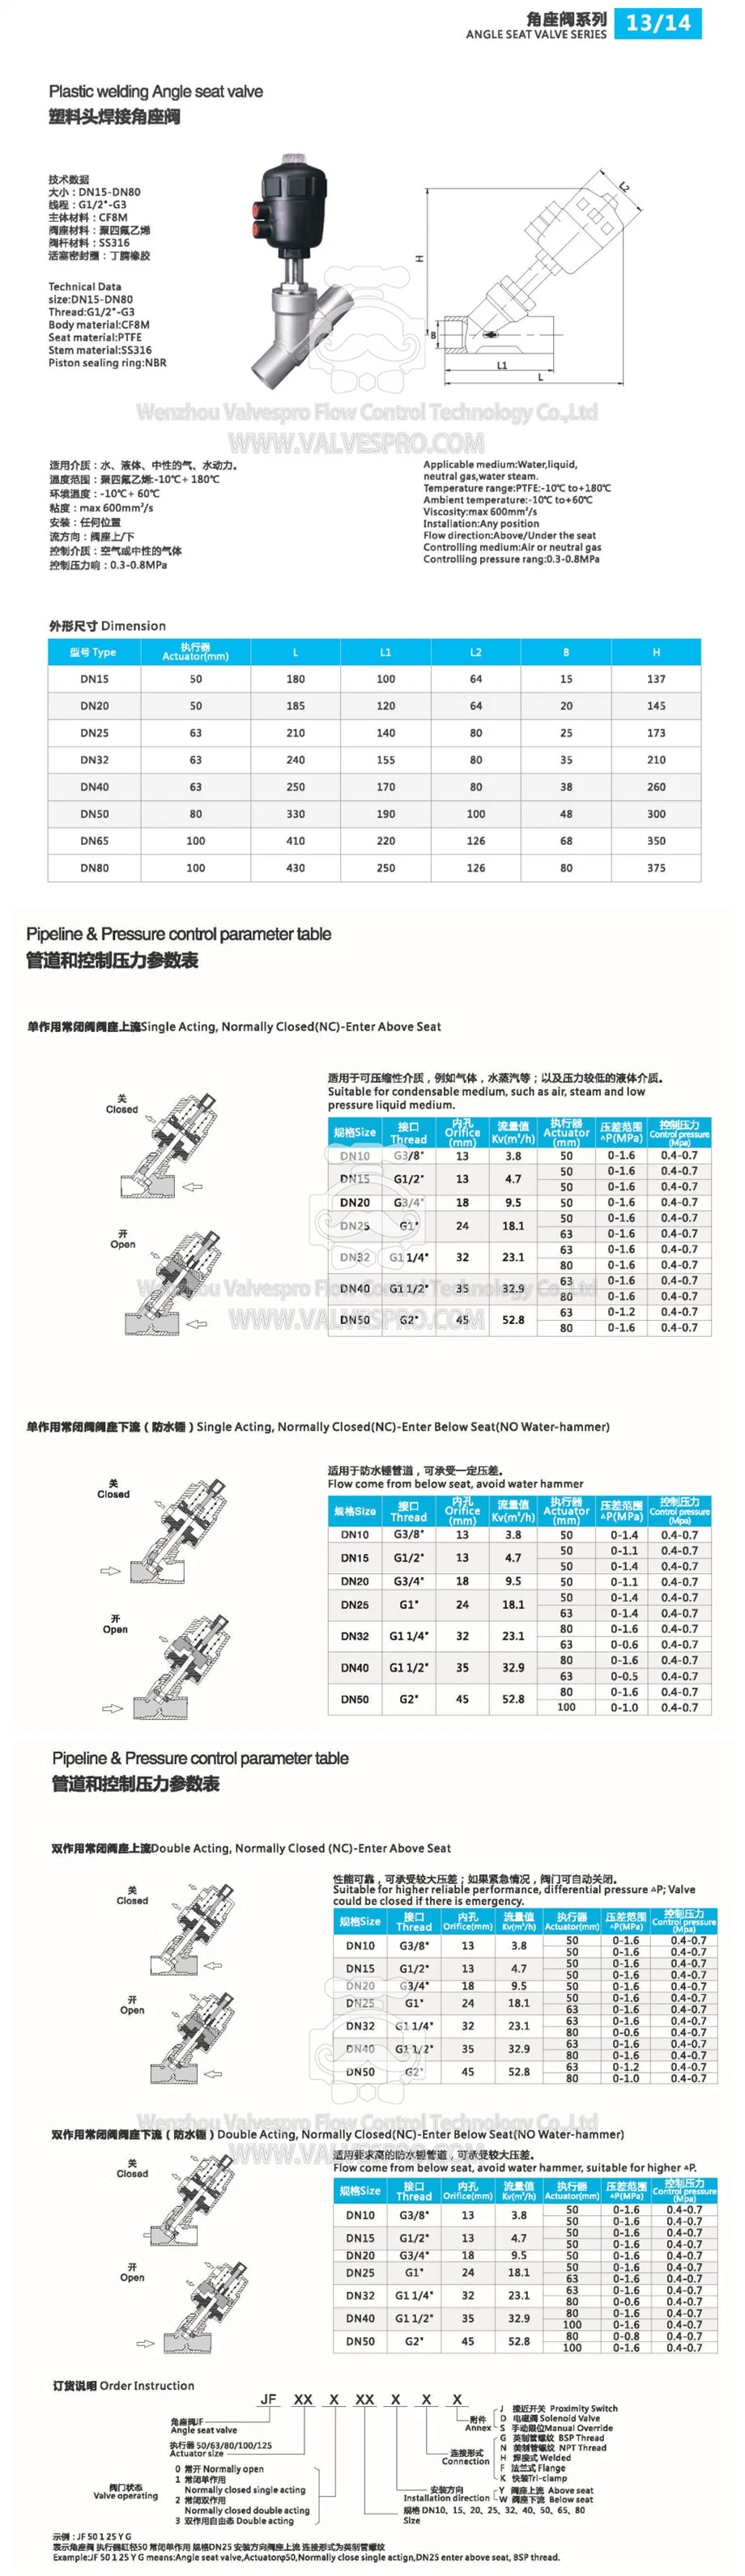 Plastic Actuator Pneumatic Angle Seat Valve with Thread/Clamp/Weld/Flange Connection Full Stainless Steel Proportional Control Valve Replace Esg